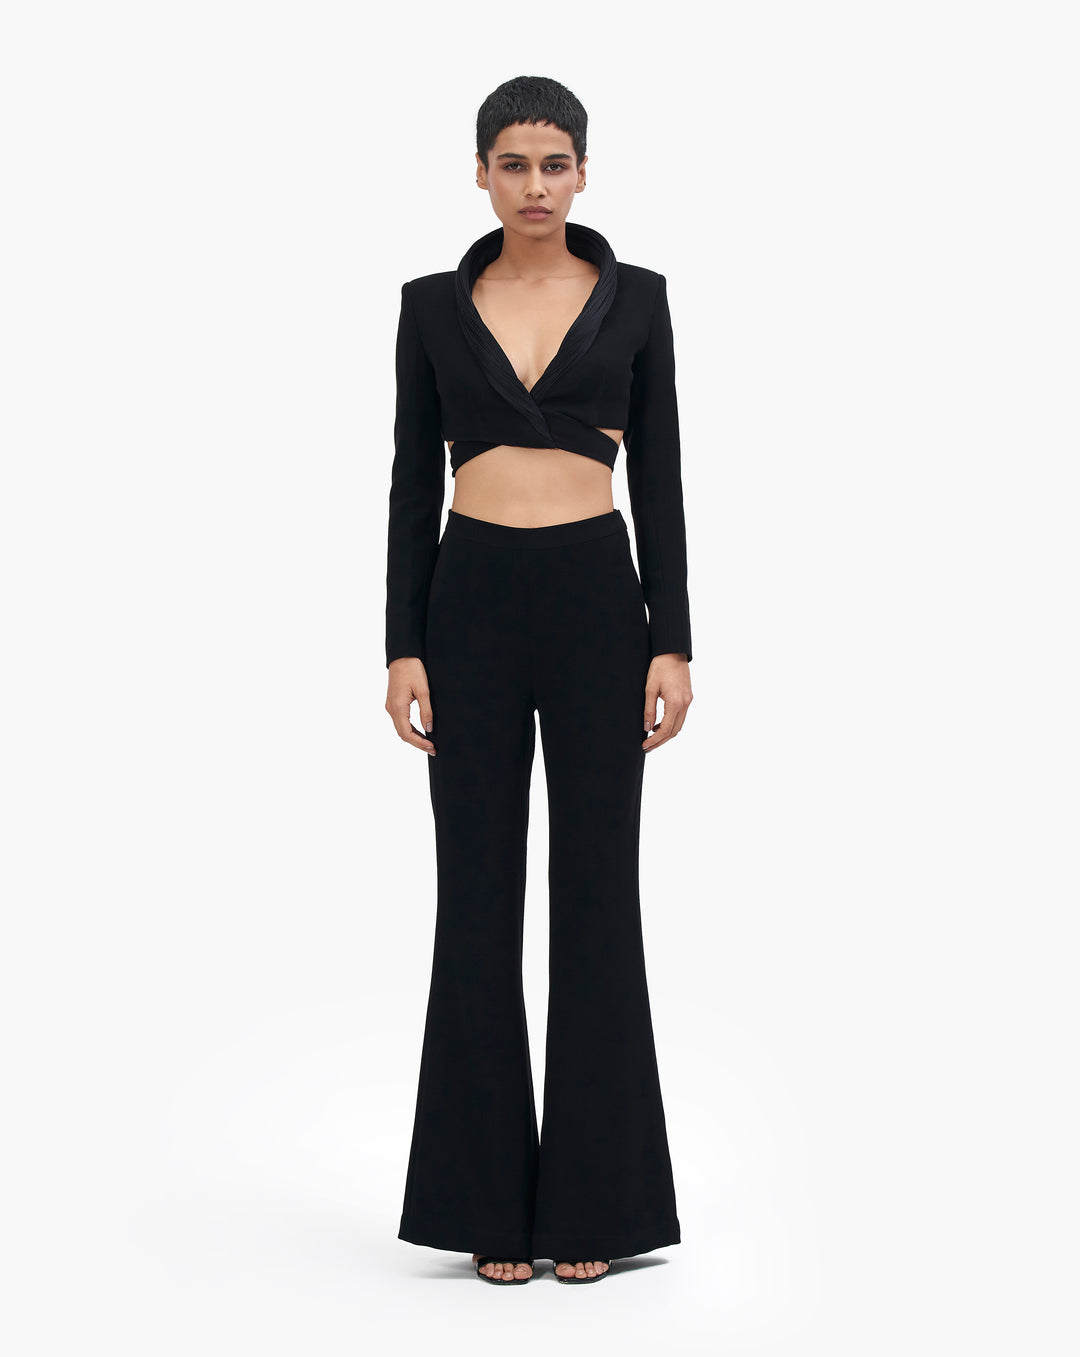 The Concentric Black Cropped Tux